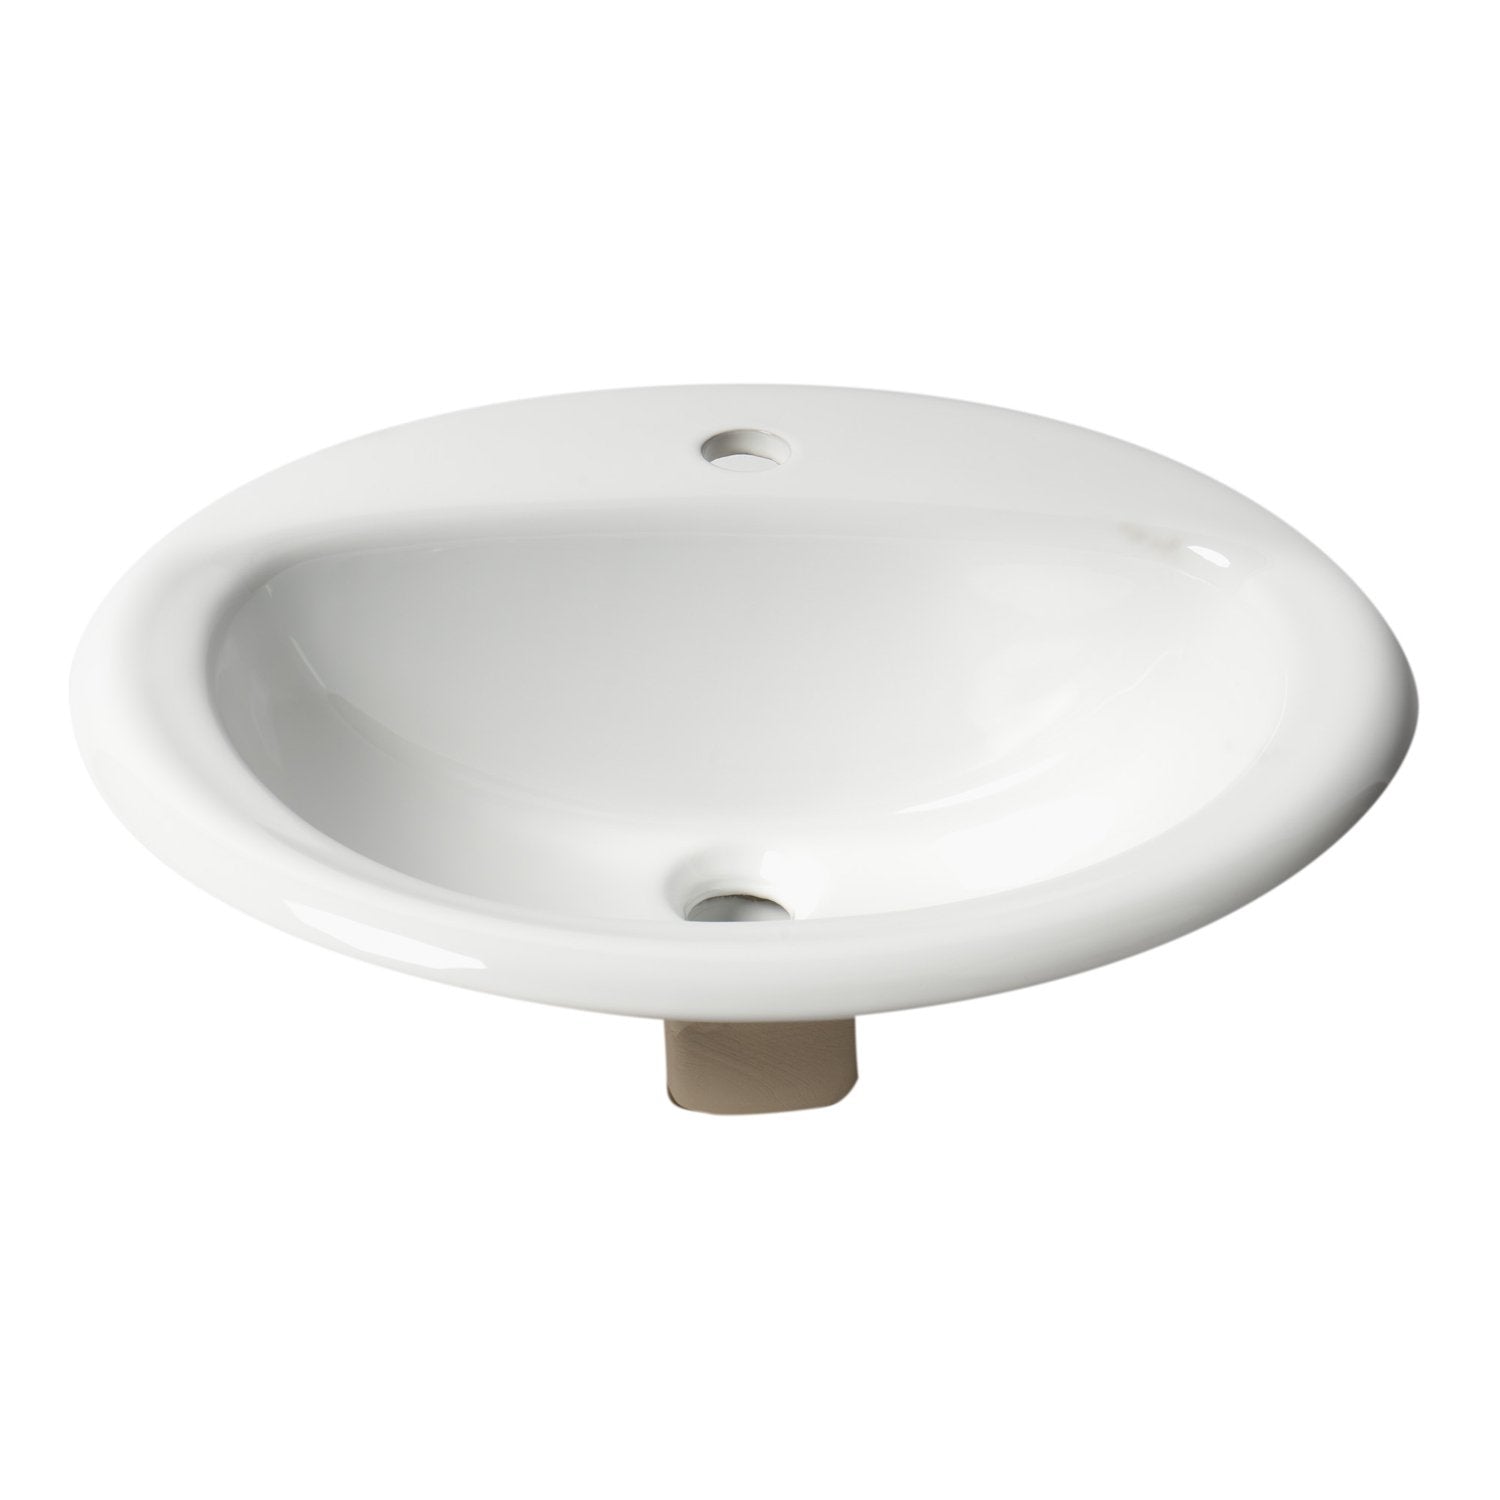 ALFI ABC802 White 21" Round Drop In Ceramic Sink with Faucet Hole